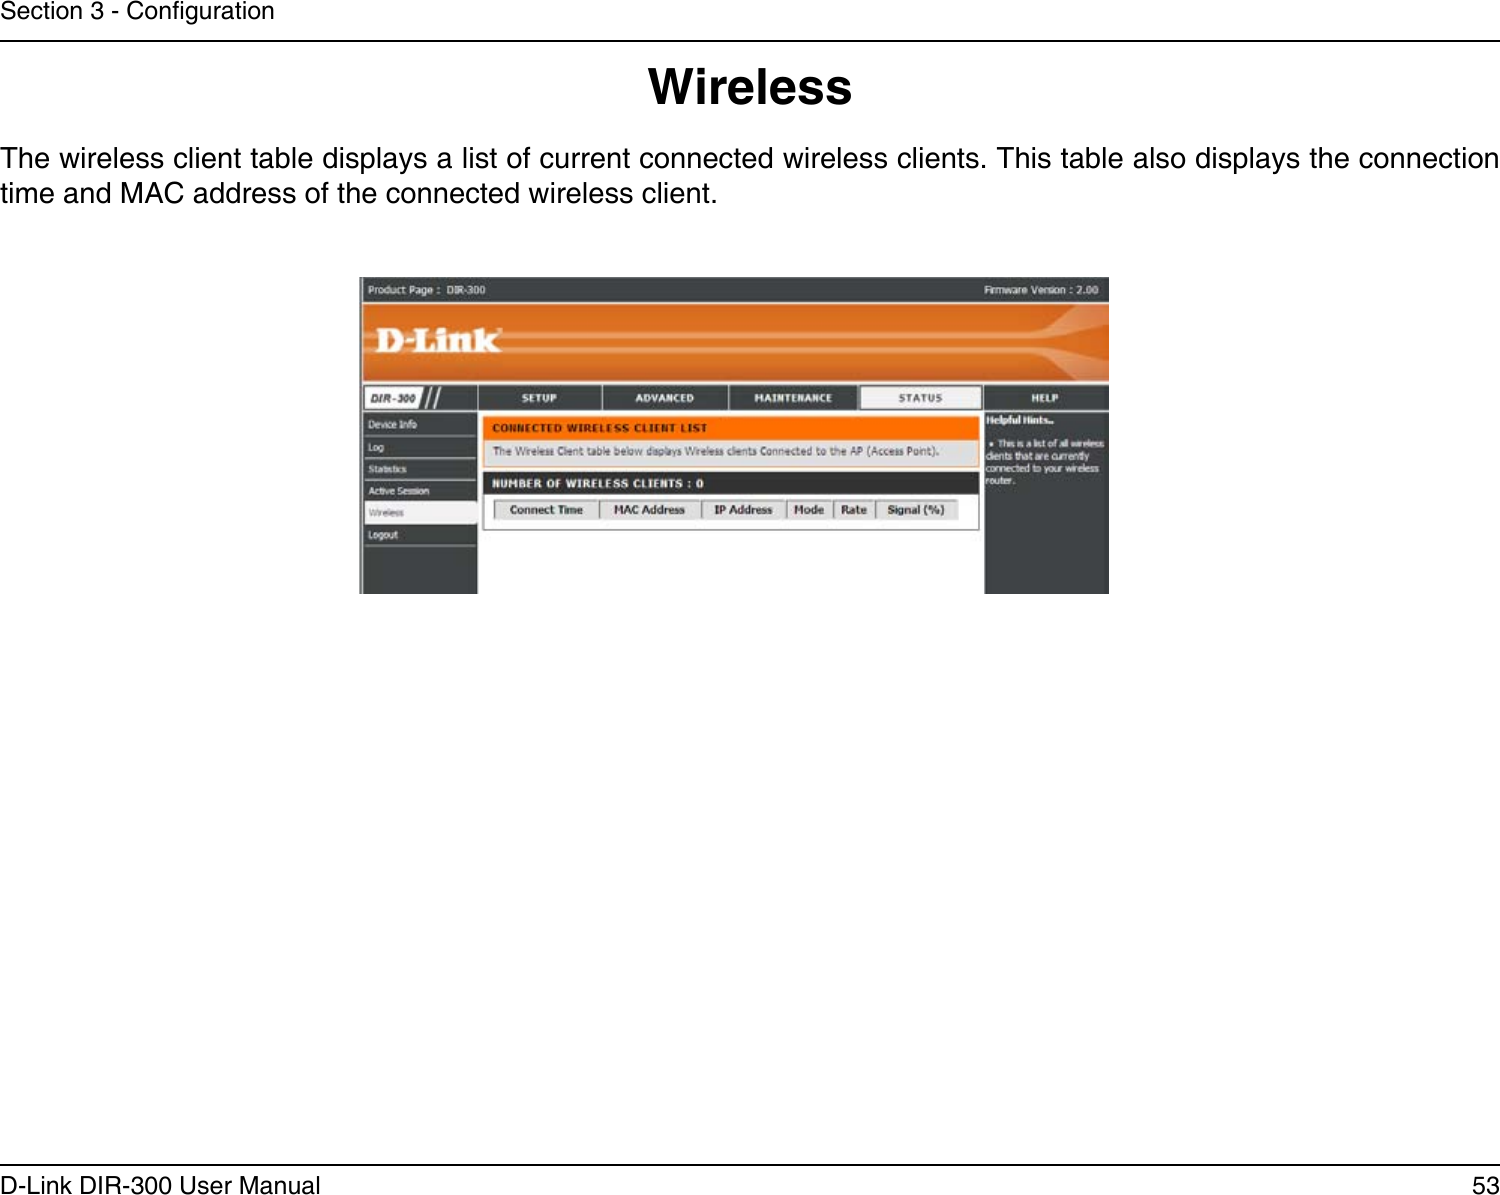 53D-Link DIR-300 User ManualSection 3 - CongurationWirelessThe wireless client table displays a list of current connected wireless clients. This table also displays the connection time and MAC address of the connected wireless client.